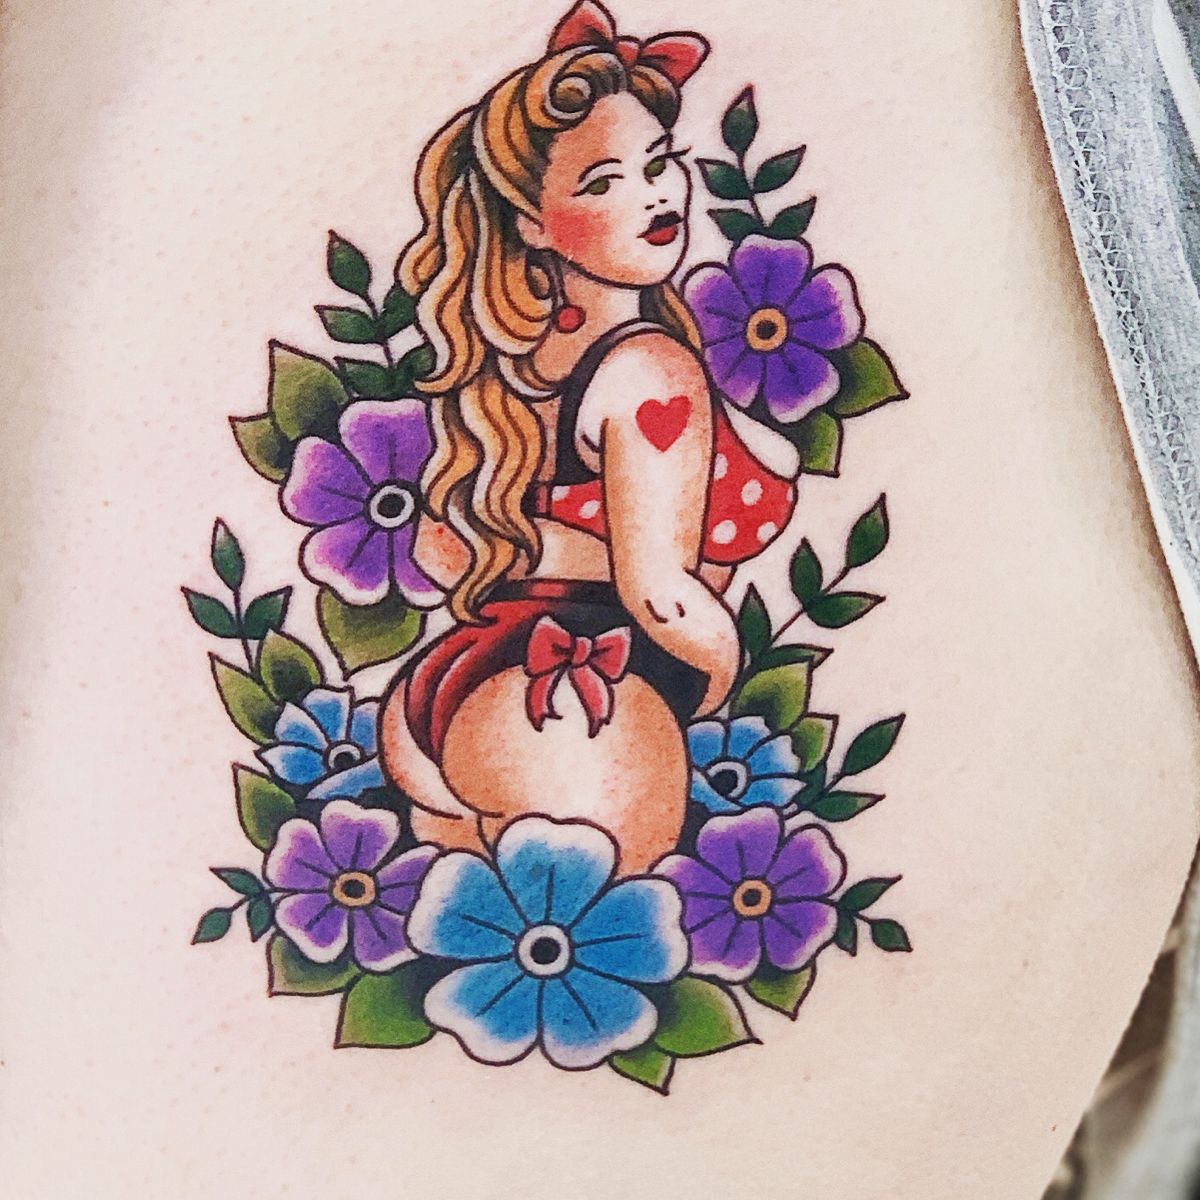 anne marie brookes add chubby pin up tattoo photo